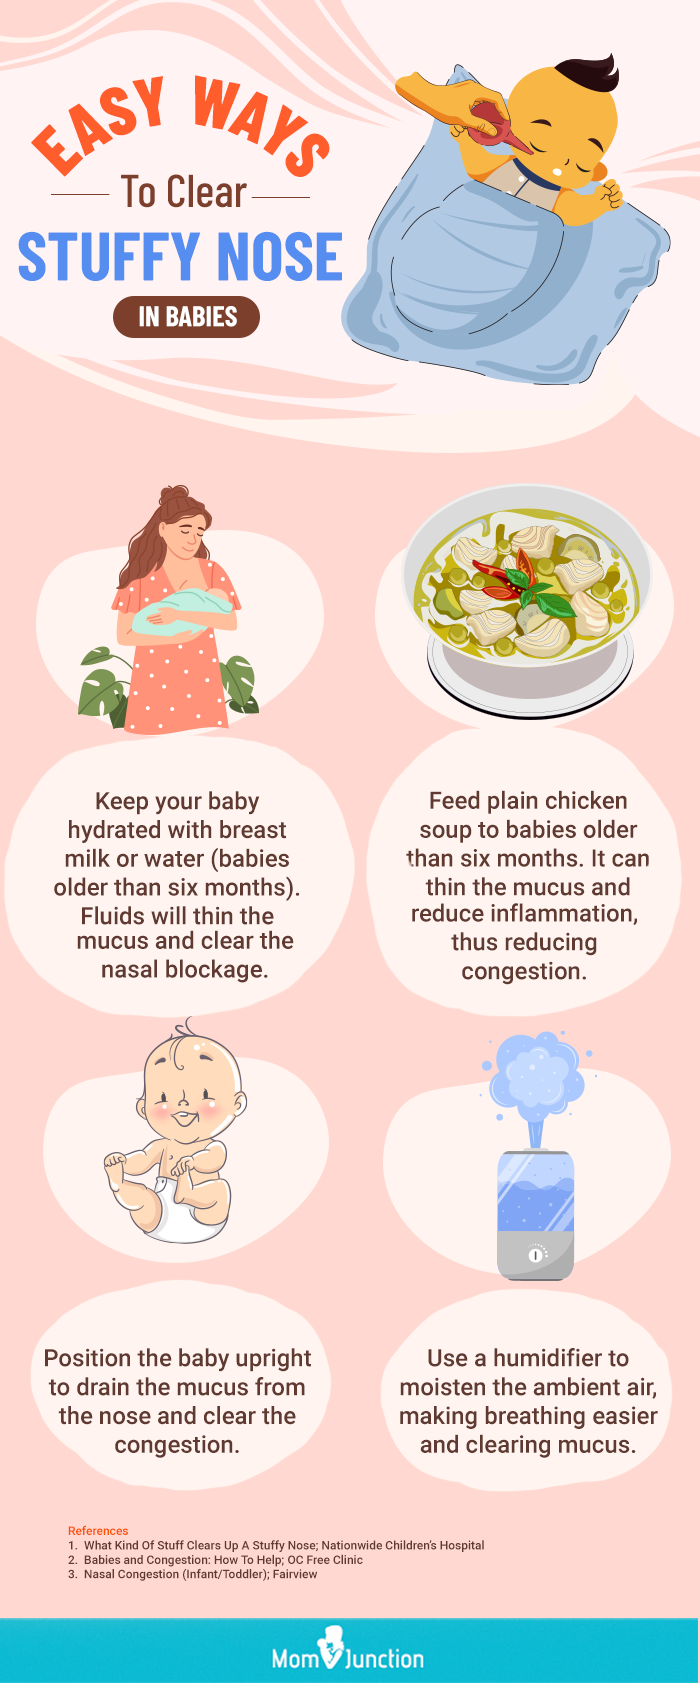 ways to clear stuffy nose in babies (infographic)